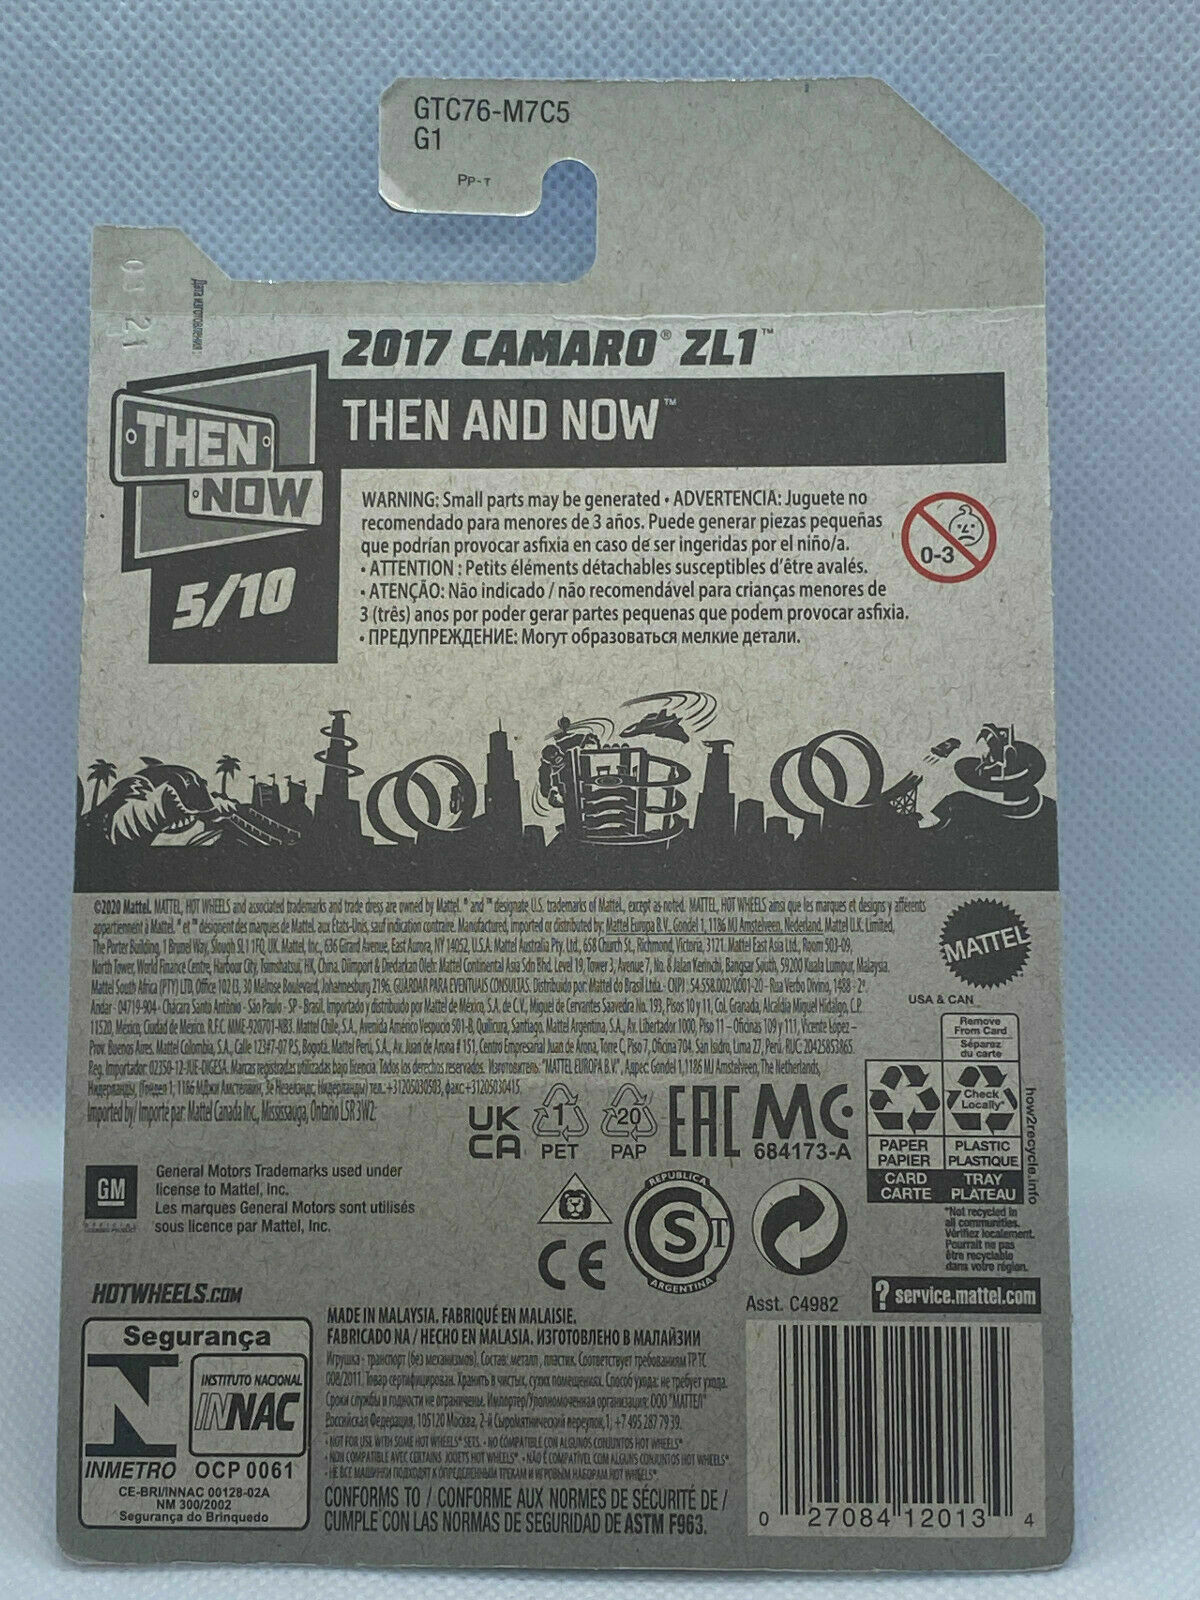 2021 Hot Wheels Then and Now #5/10 Chevrolet 2017 Camaro ZL1 #154/250 NIP